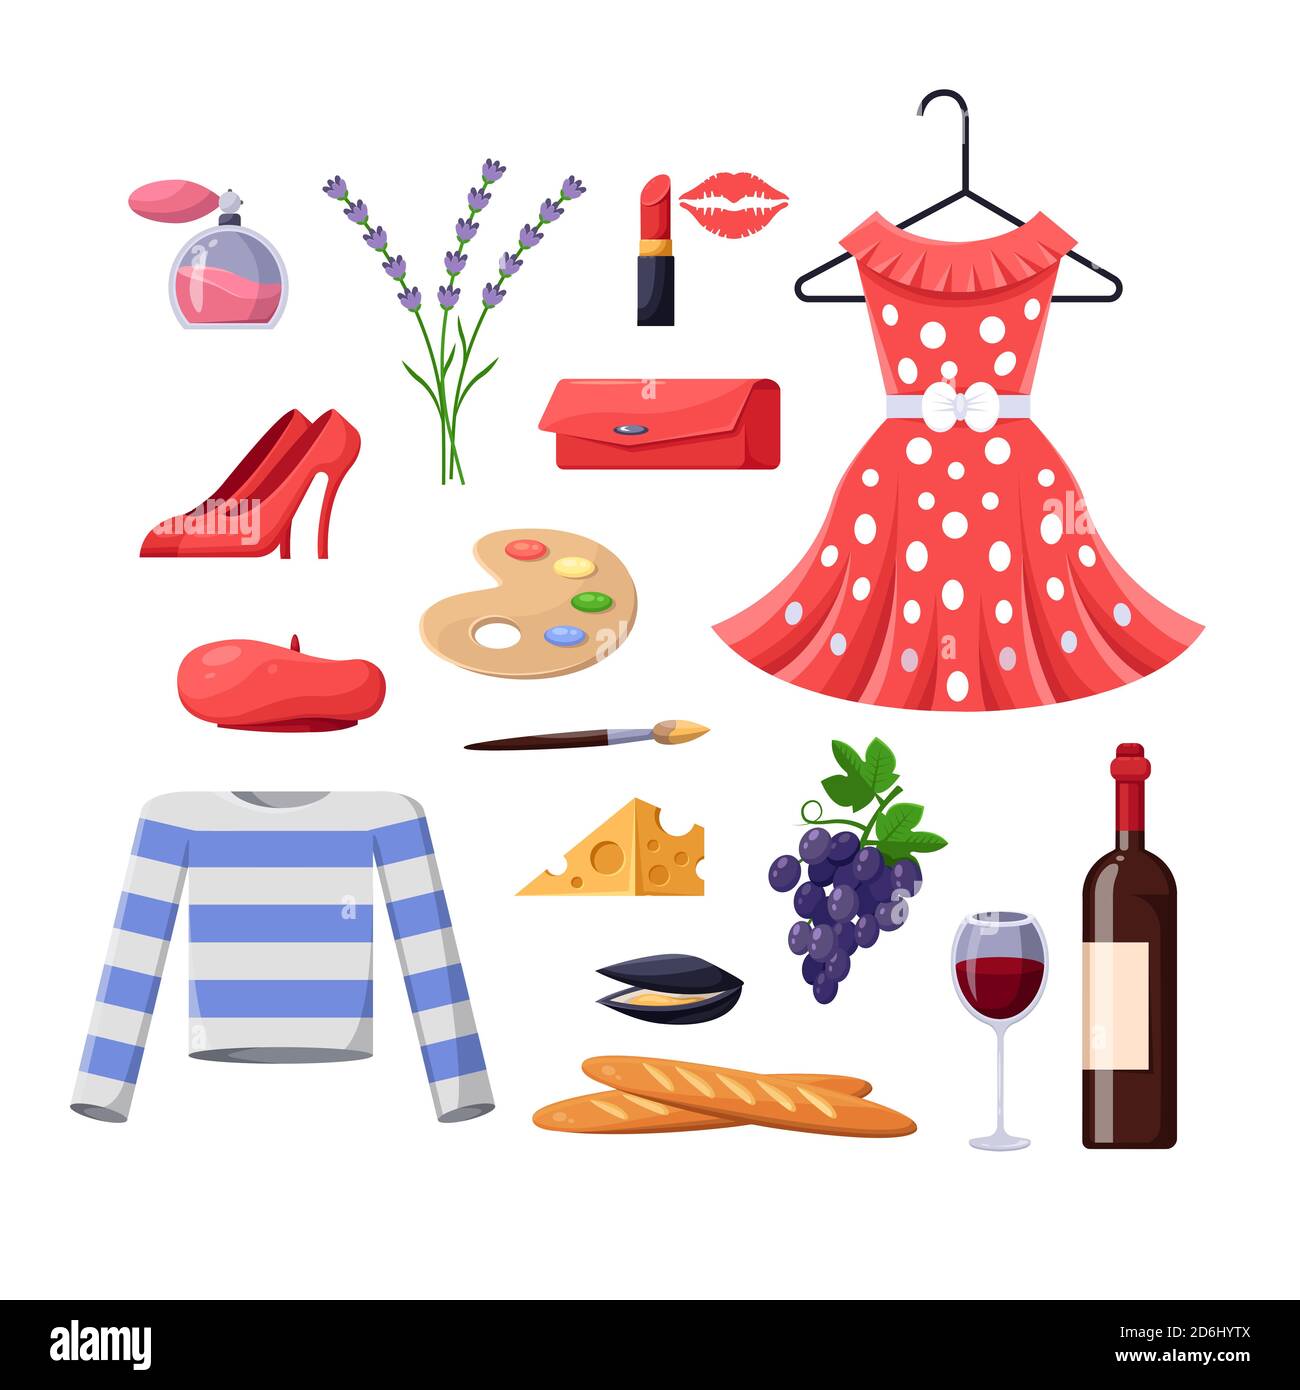 Travel to France design elements. Paris fashion and food illustration. Vector cartoon isolated icons set. Stock Vector